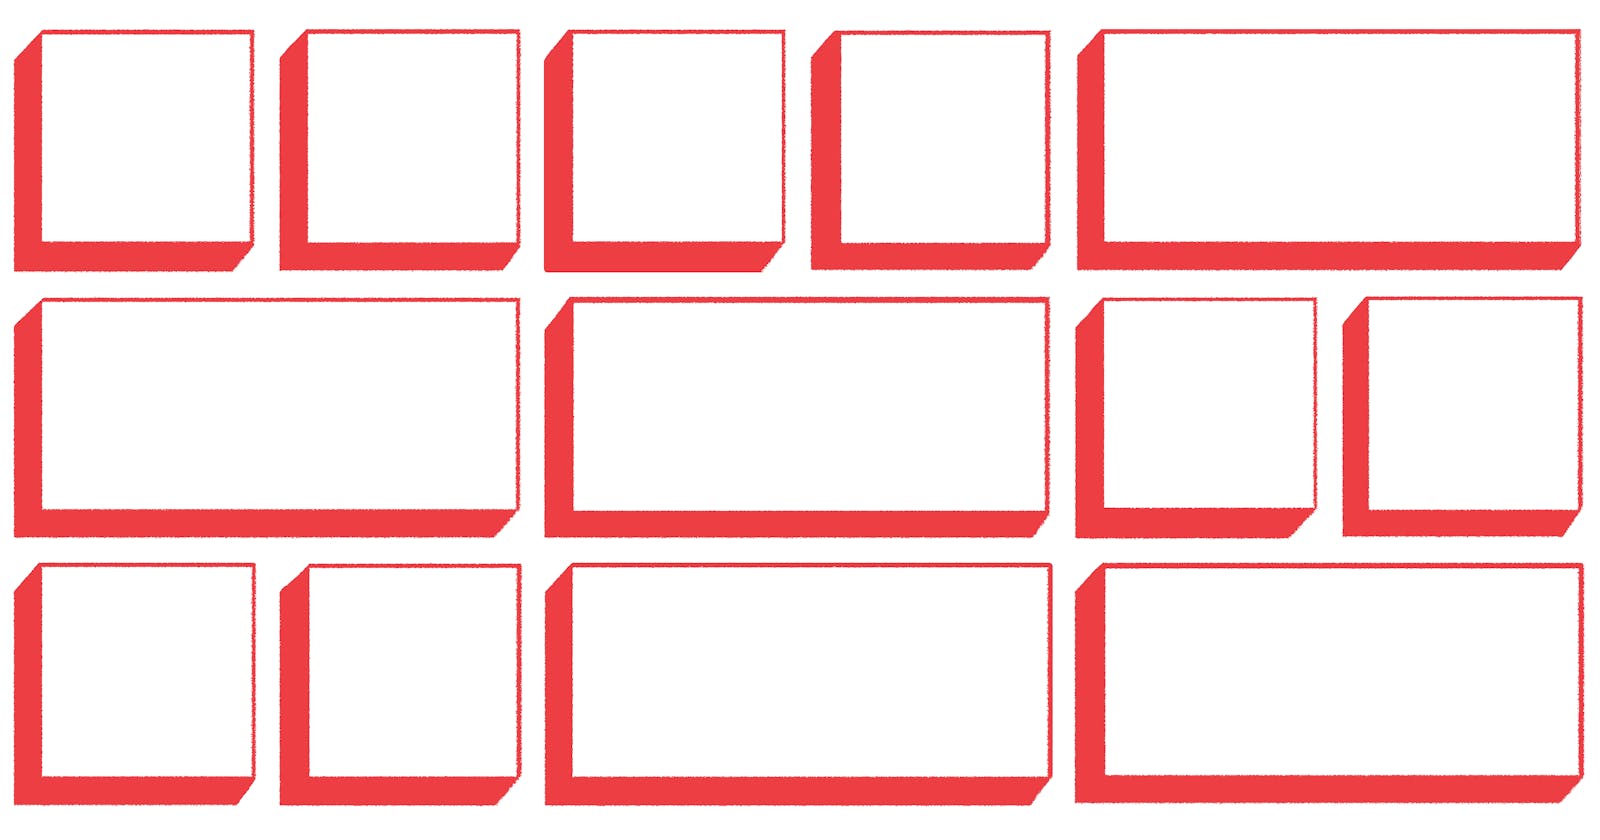 Grid Layout in CSS.